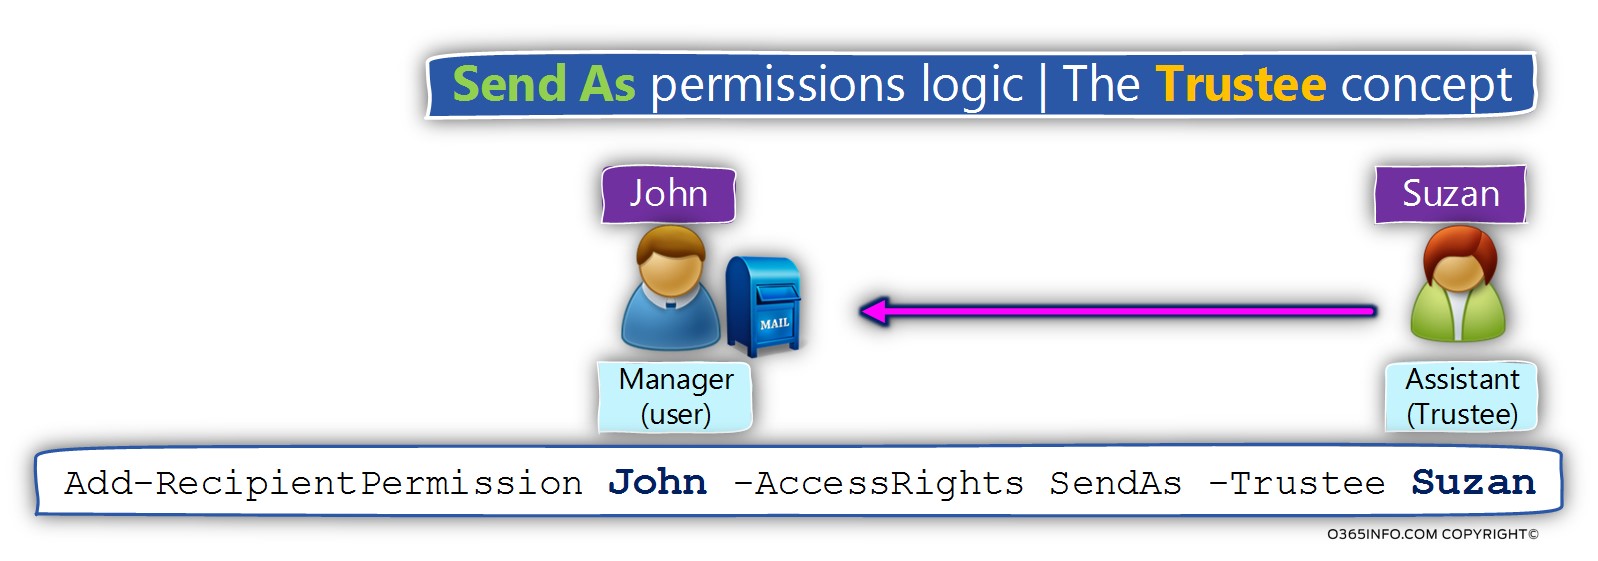 Send As permissions logic -The Trustee concept